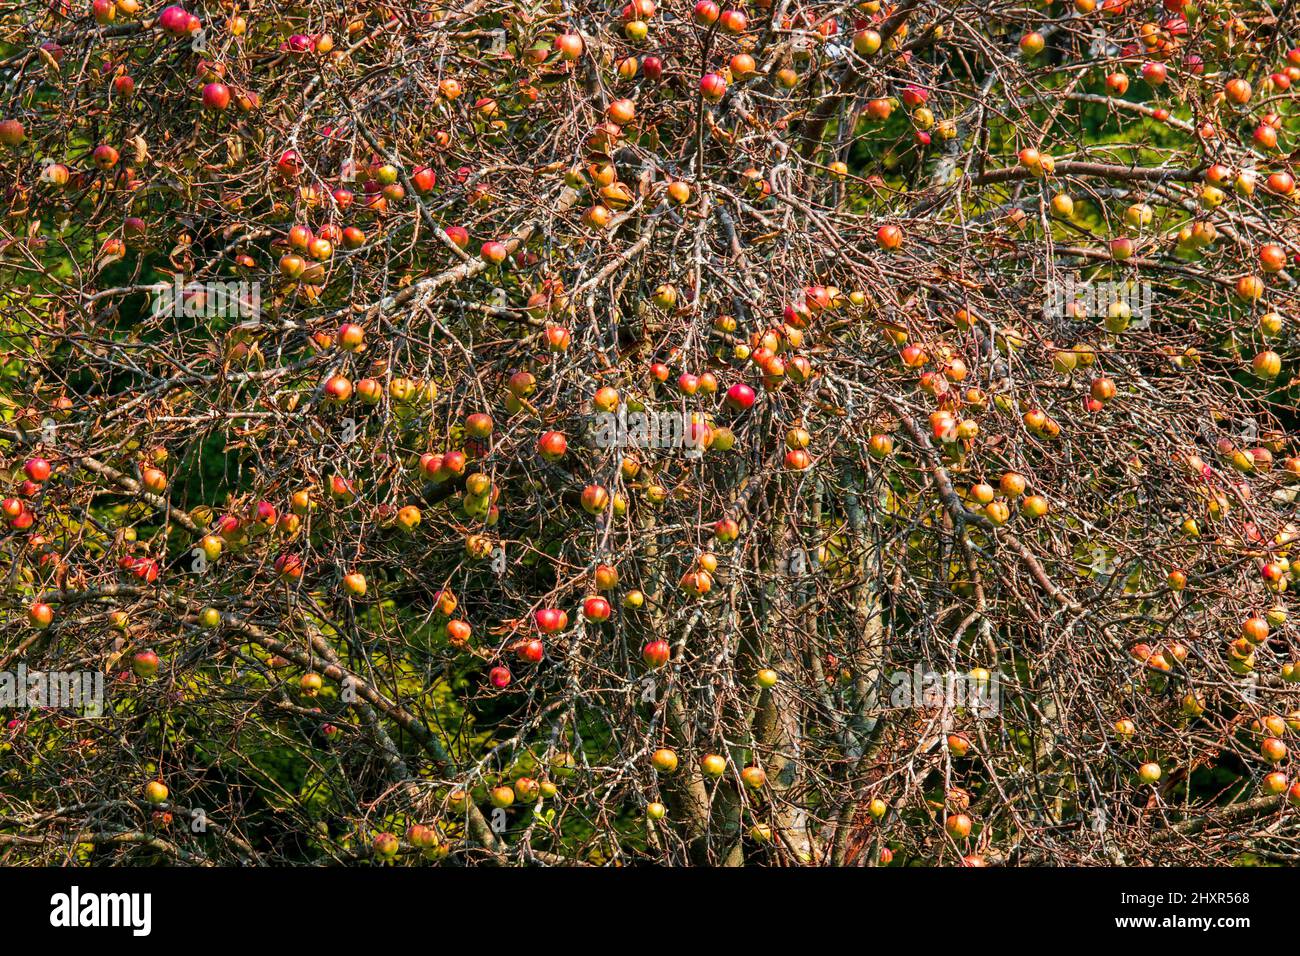 A Wild Domestic Apple tree bearing a large amount of fruit in Pennsylvania's Pocono Mountains Stock Photo